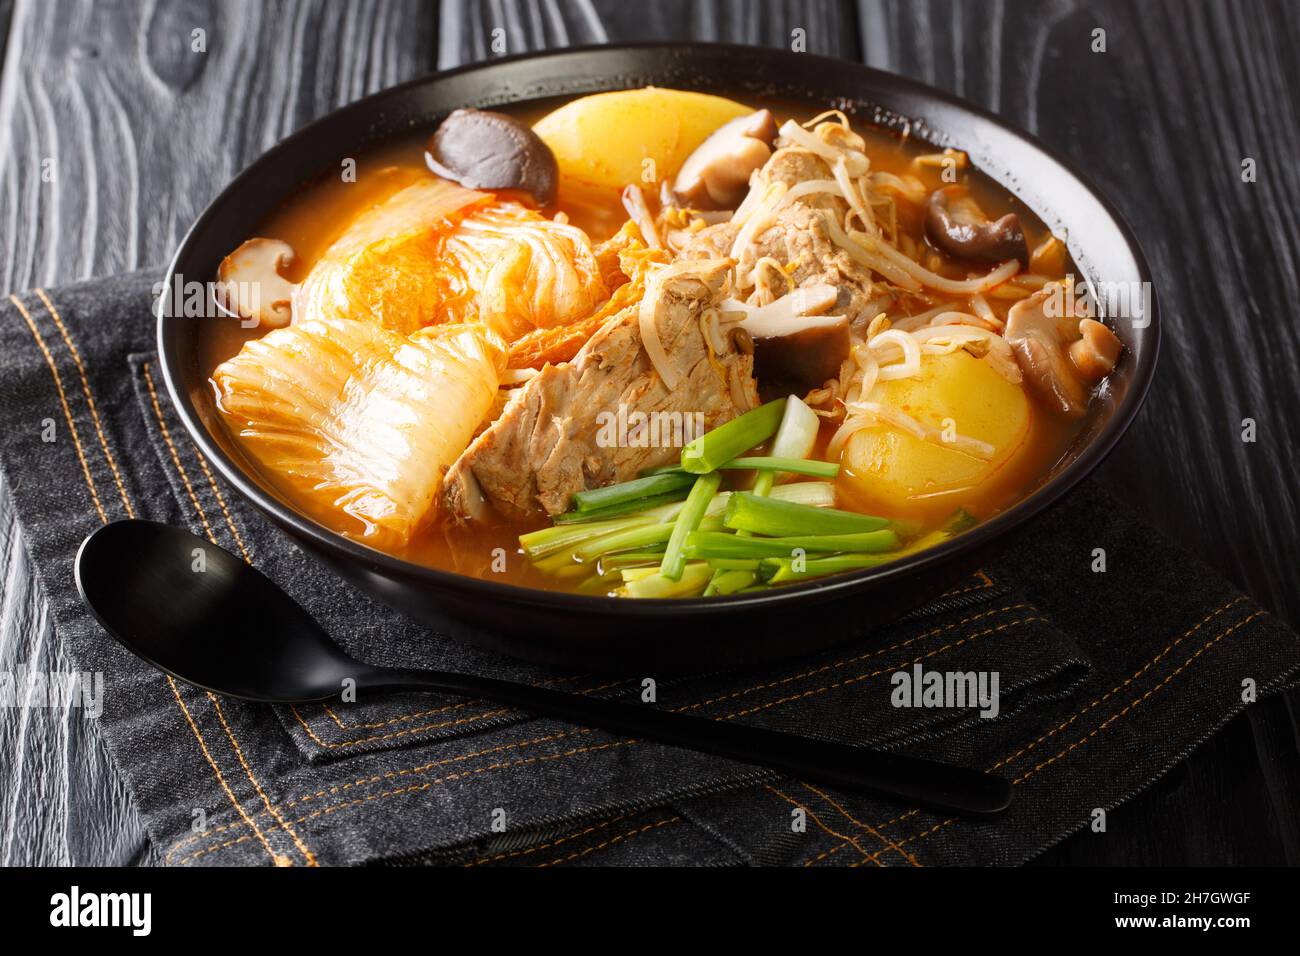 Tasty spicy Gamjatang Korean Pork Bone Soup with creamy potatoes and tender juicy pork bone meat close up in the bowl on the table. Horizontal Stock Photo